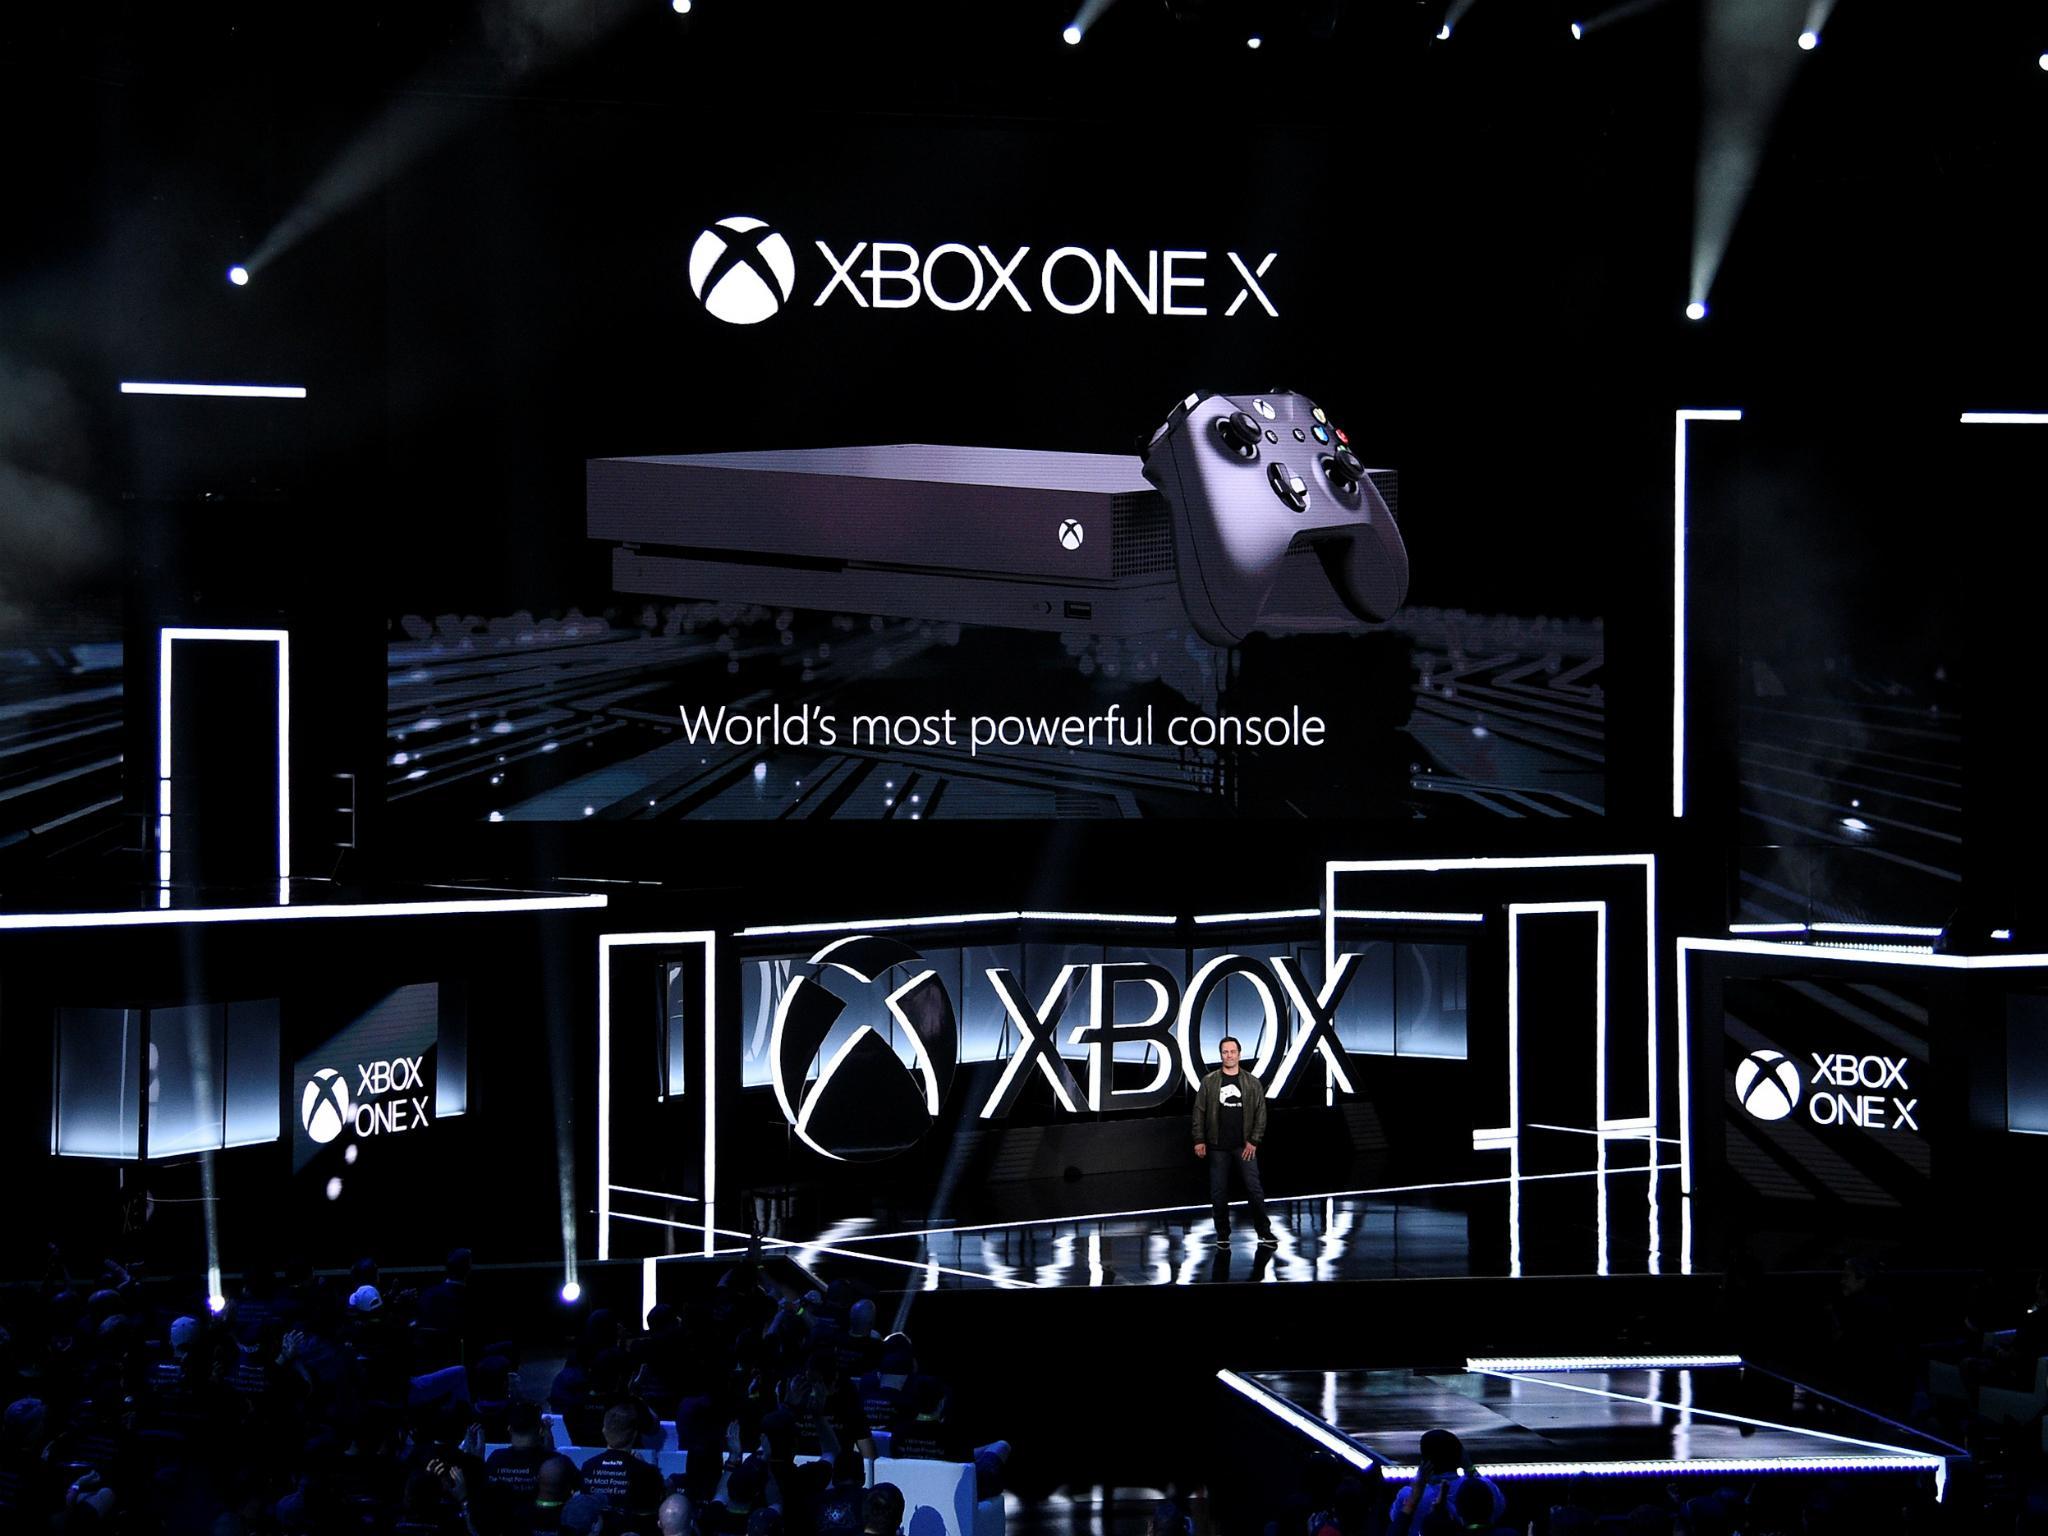 Microsoft says over 100 games will be enhanced to take advantage of the Xbox One X's full power